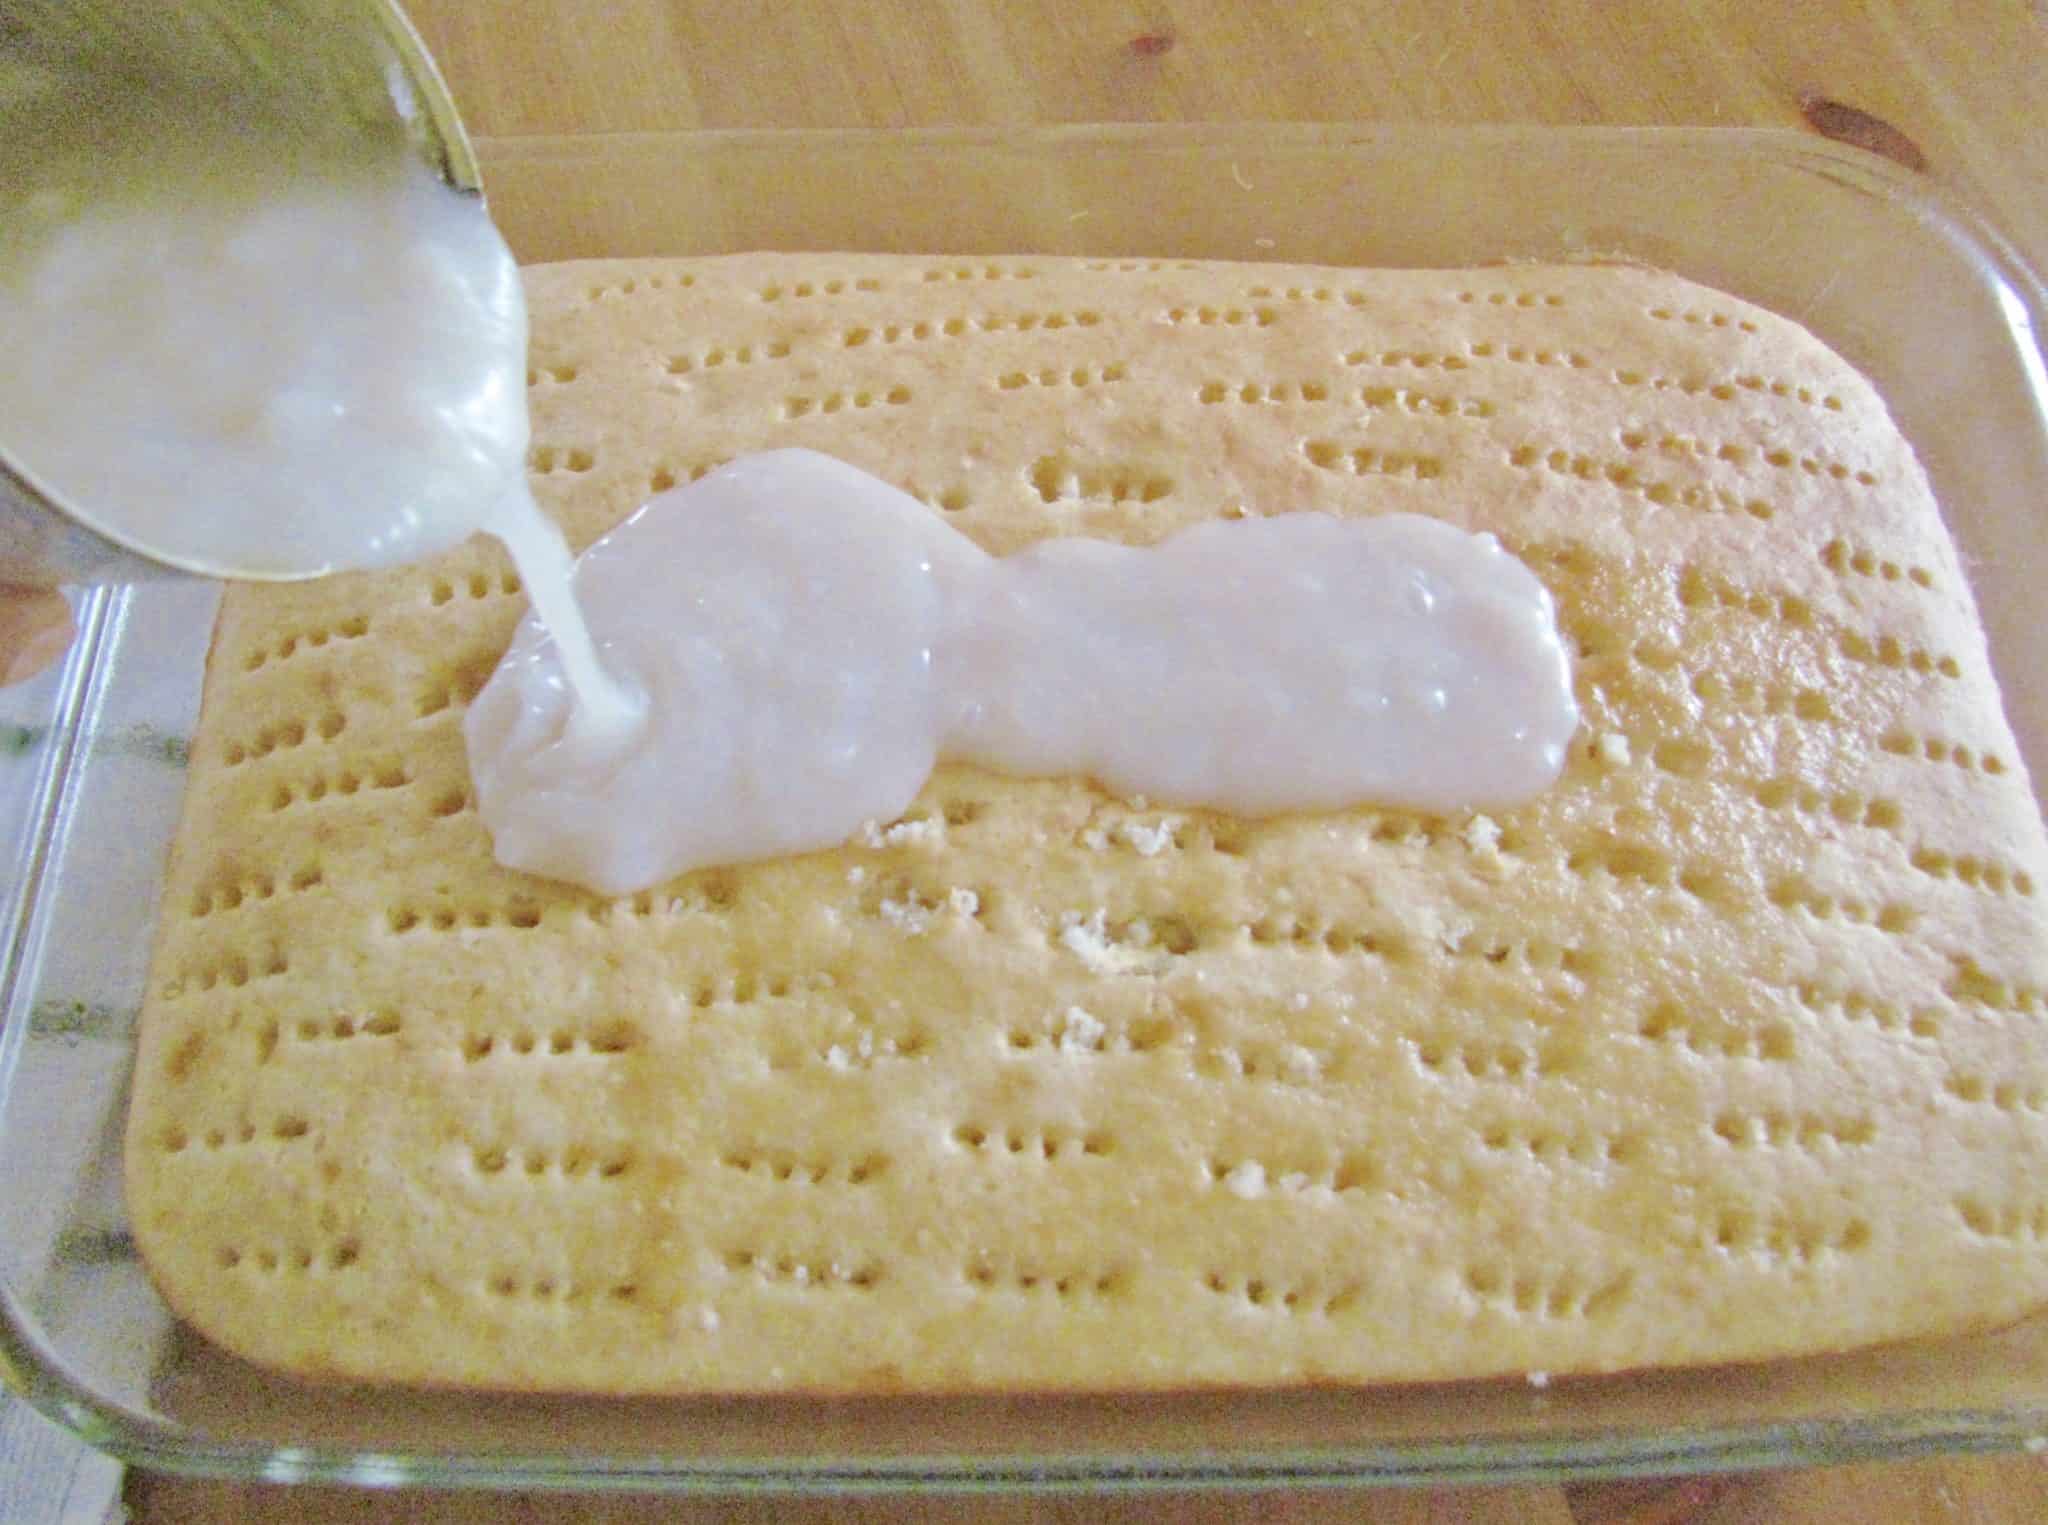 pouring cream of coconut into the poked holes of baked white cake.